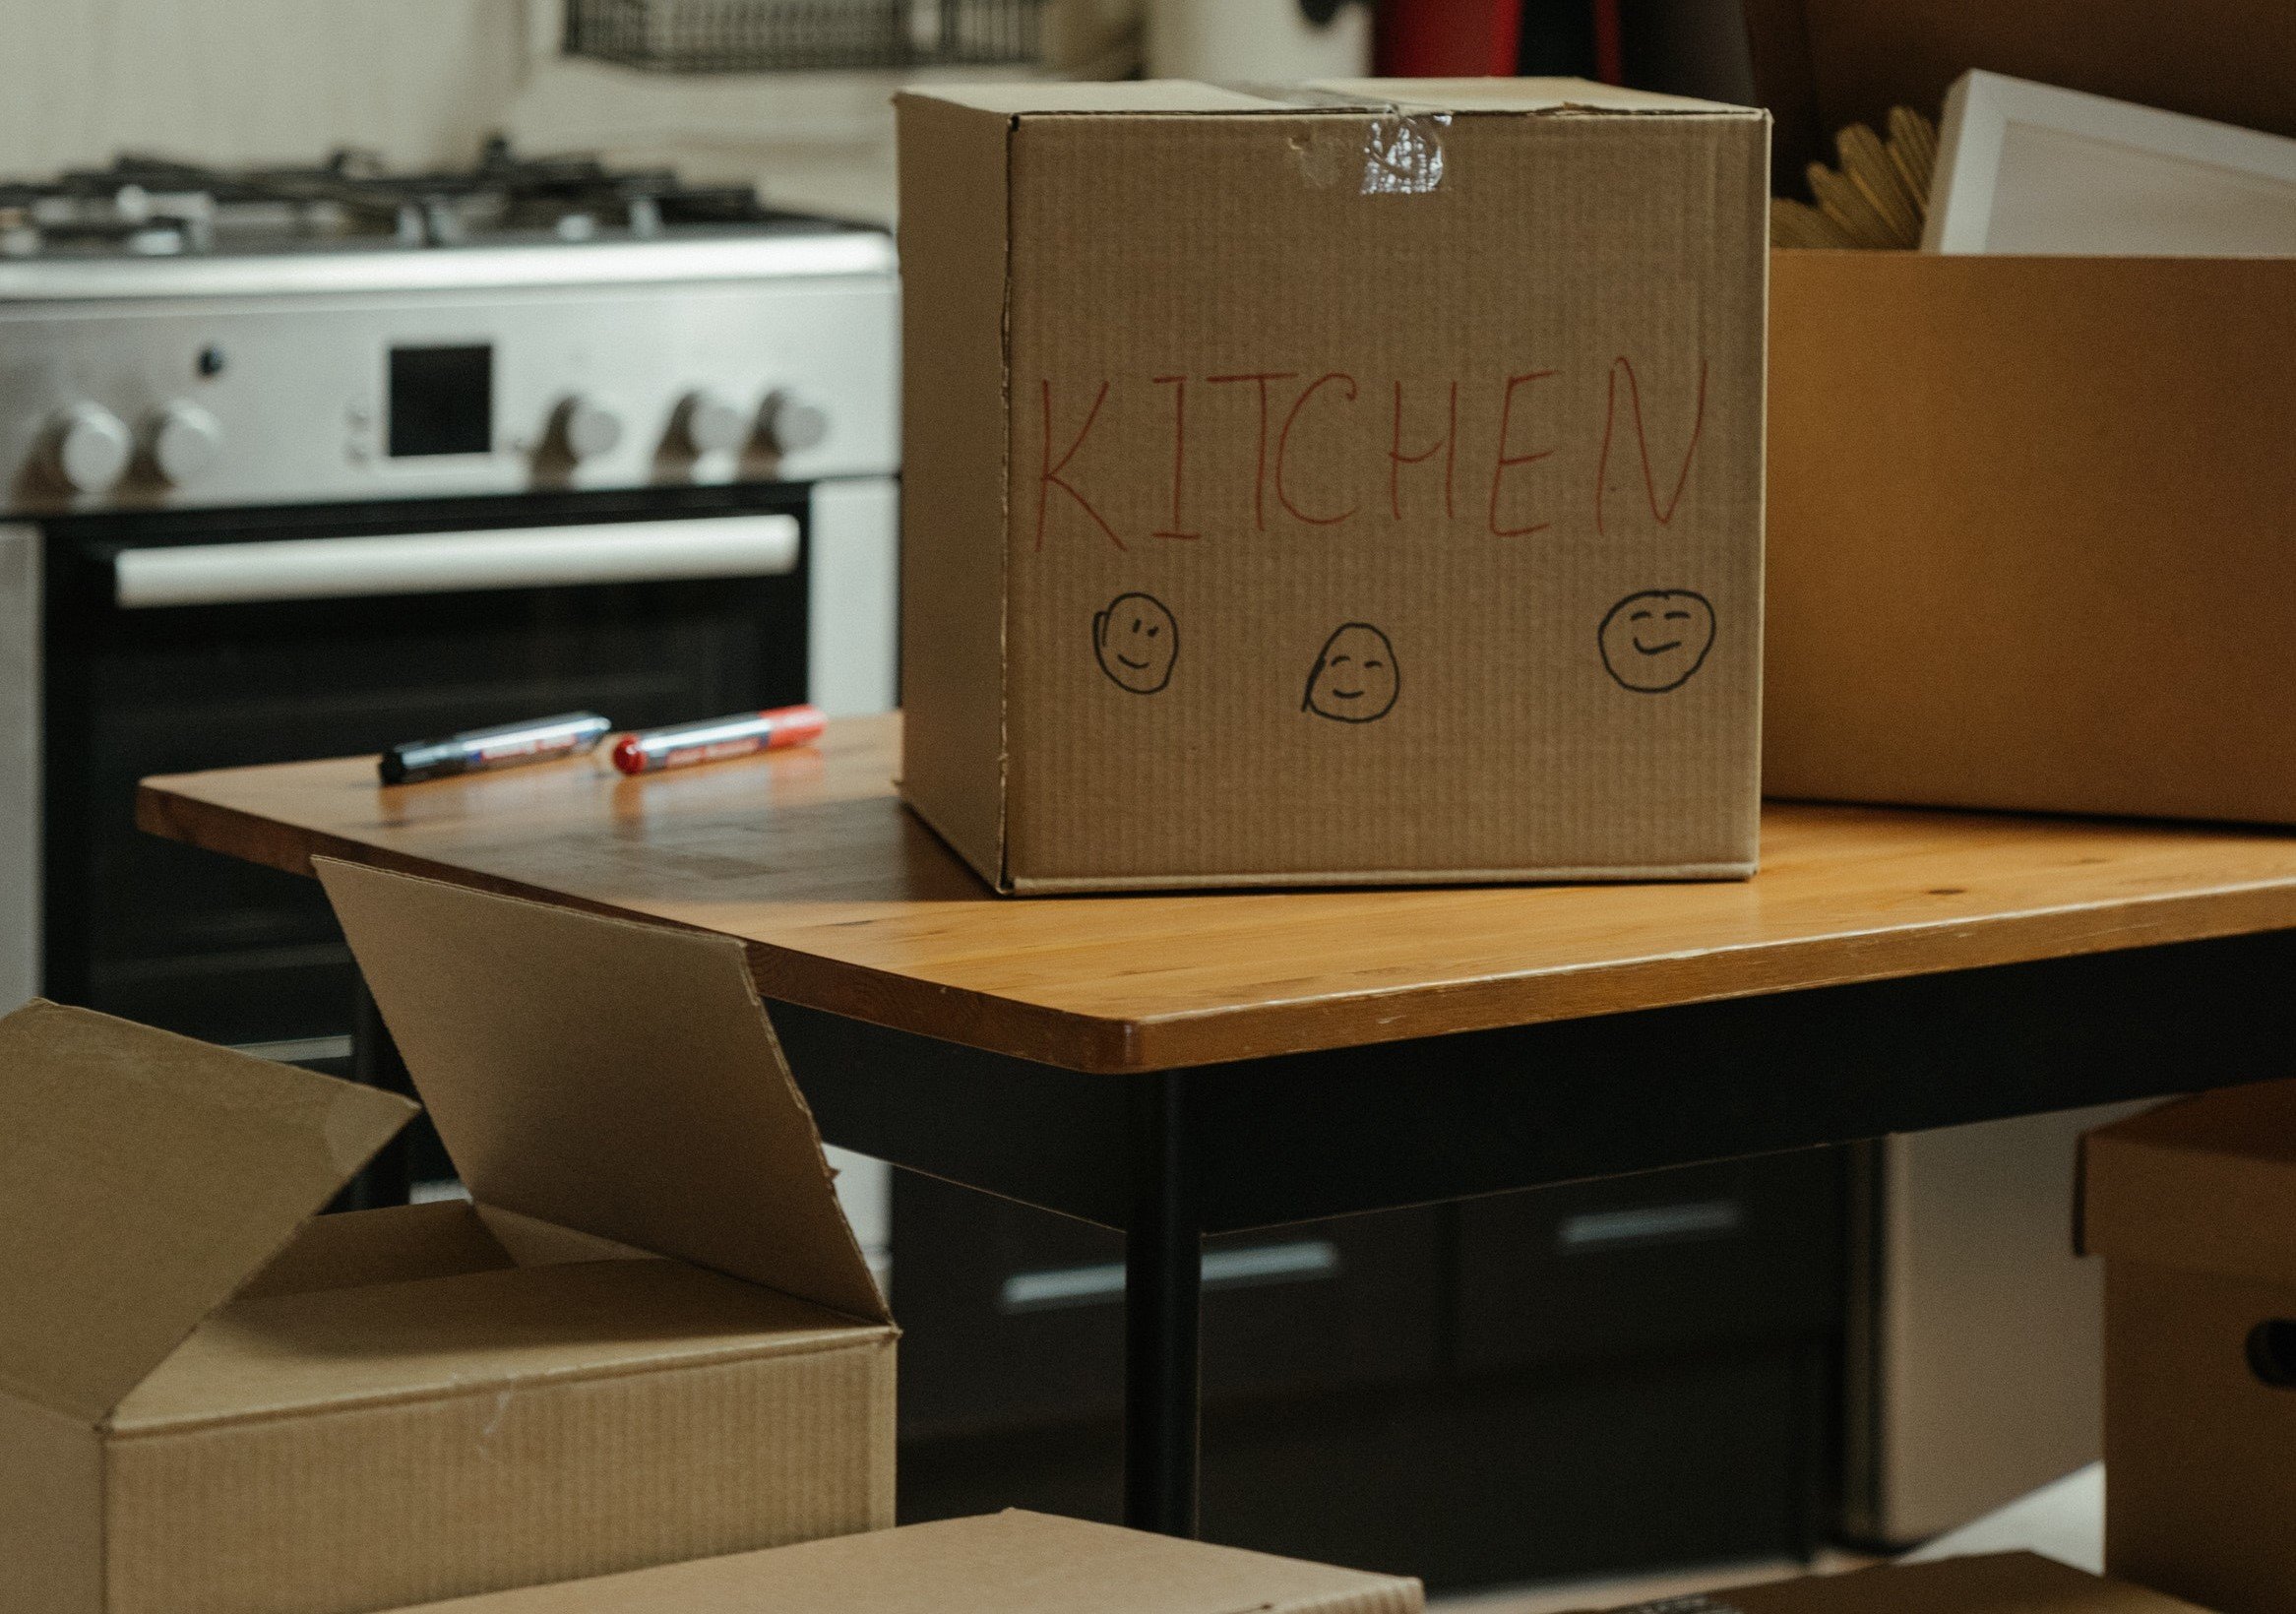 OP's dad & the lawyer spotted strange boxes in the kitchen | Photo: Pexels